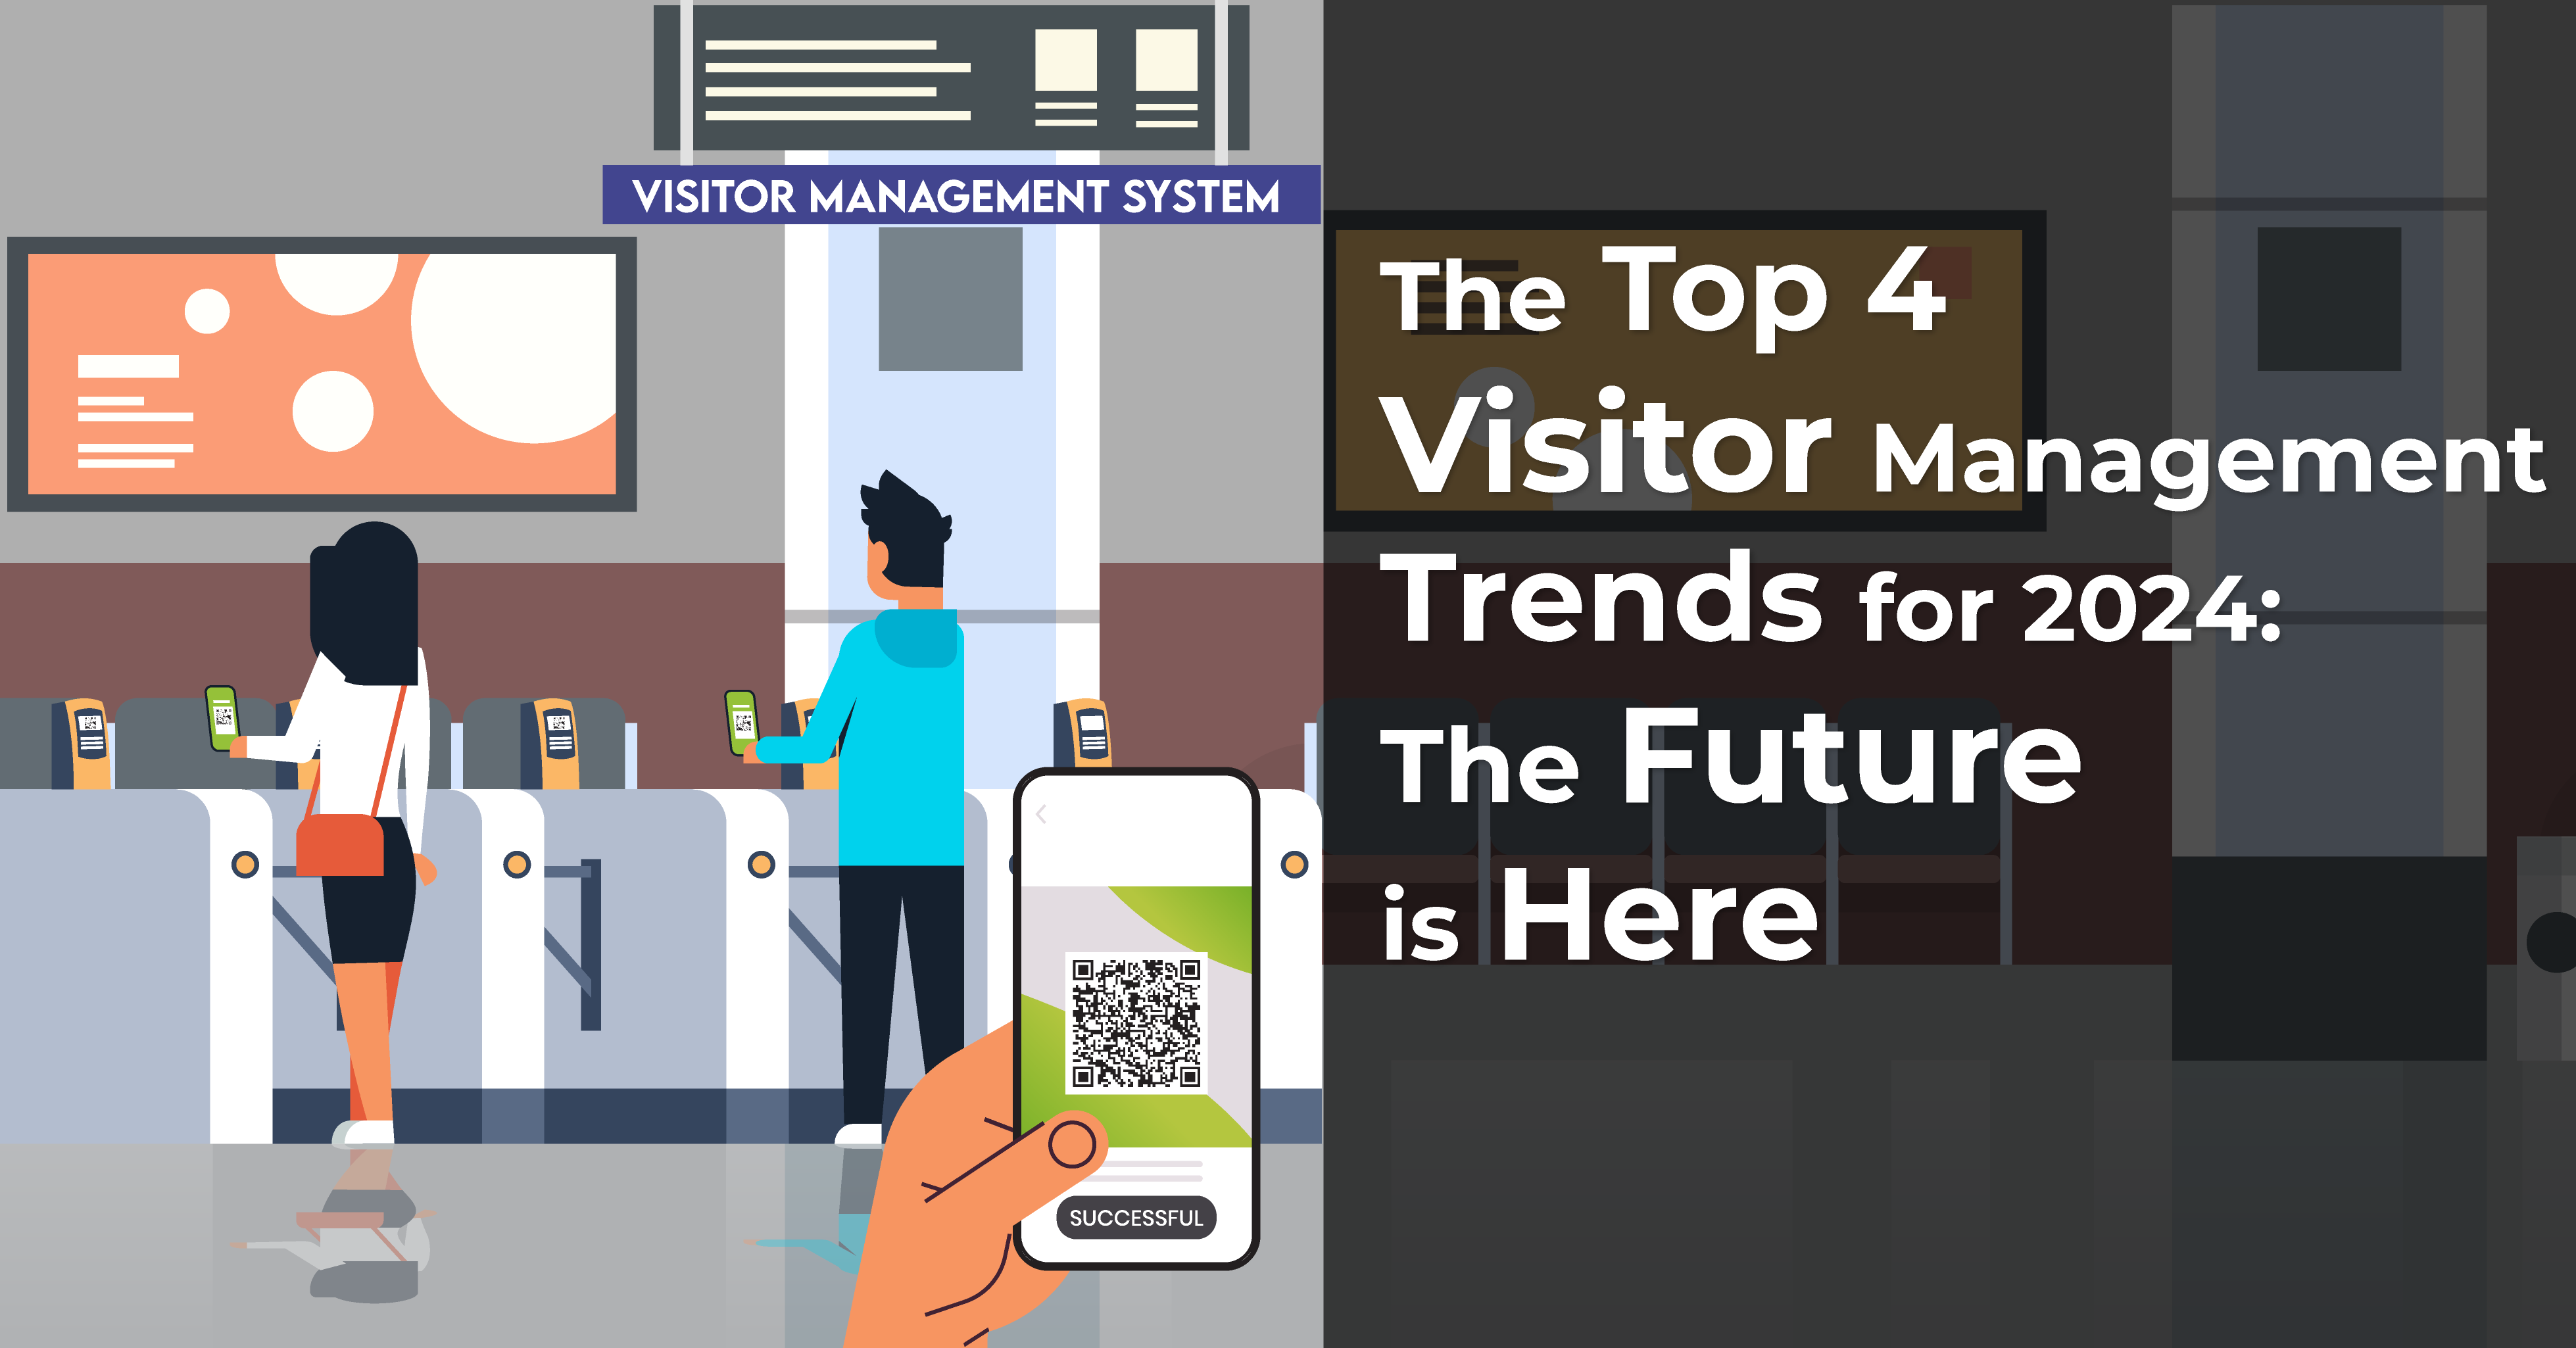 The Top 4 Visitor Management Trends for 2024: The Future is Here